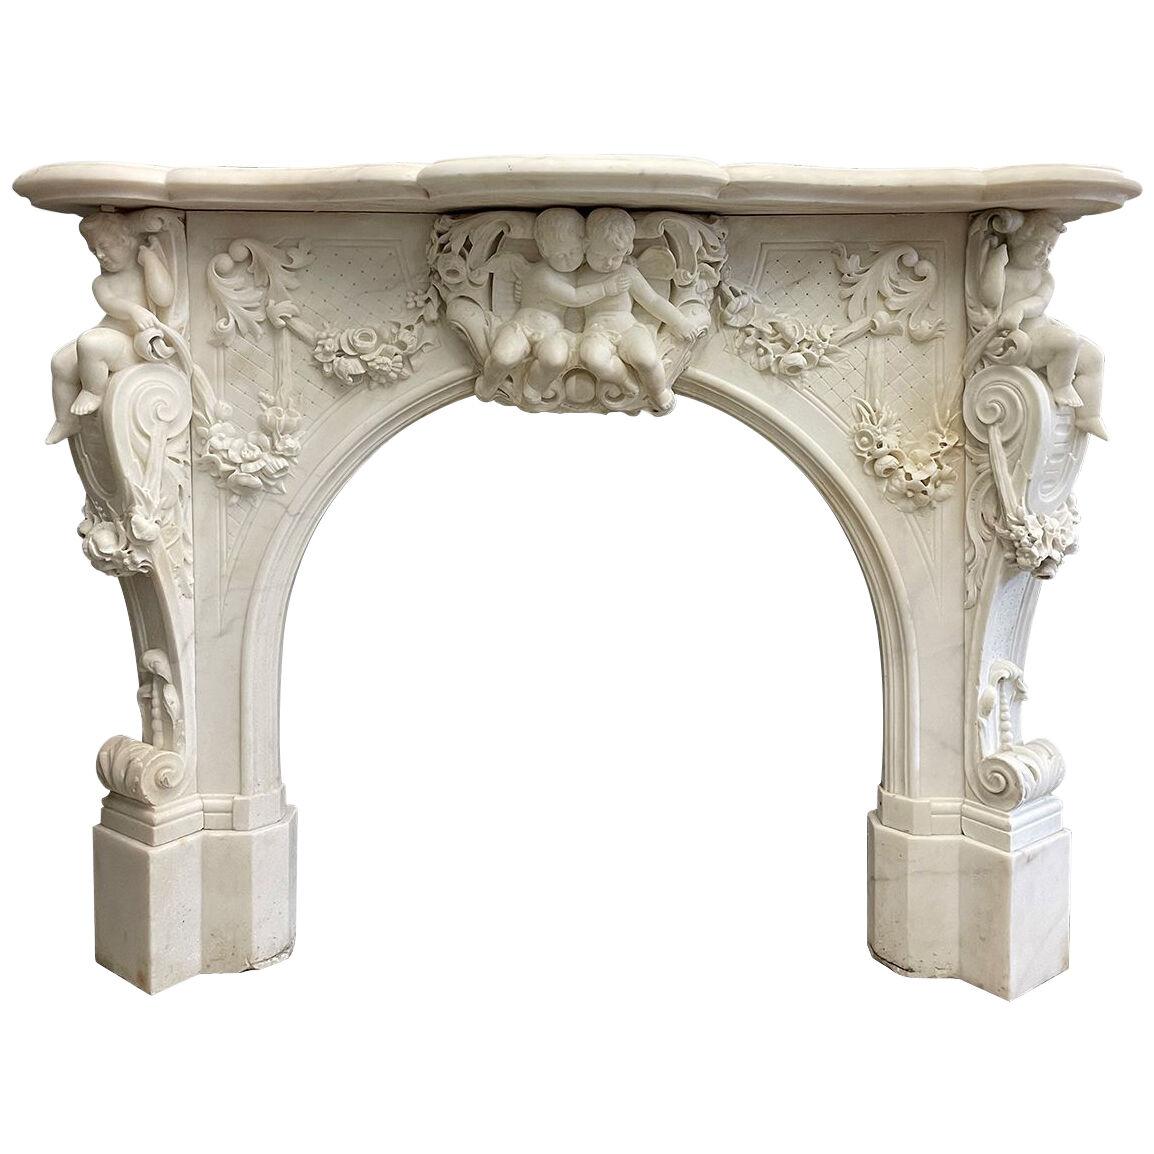 Antique Italian Statuary White Marble Baroque Style Fireplace Mantel